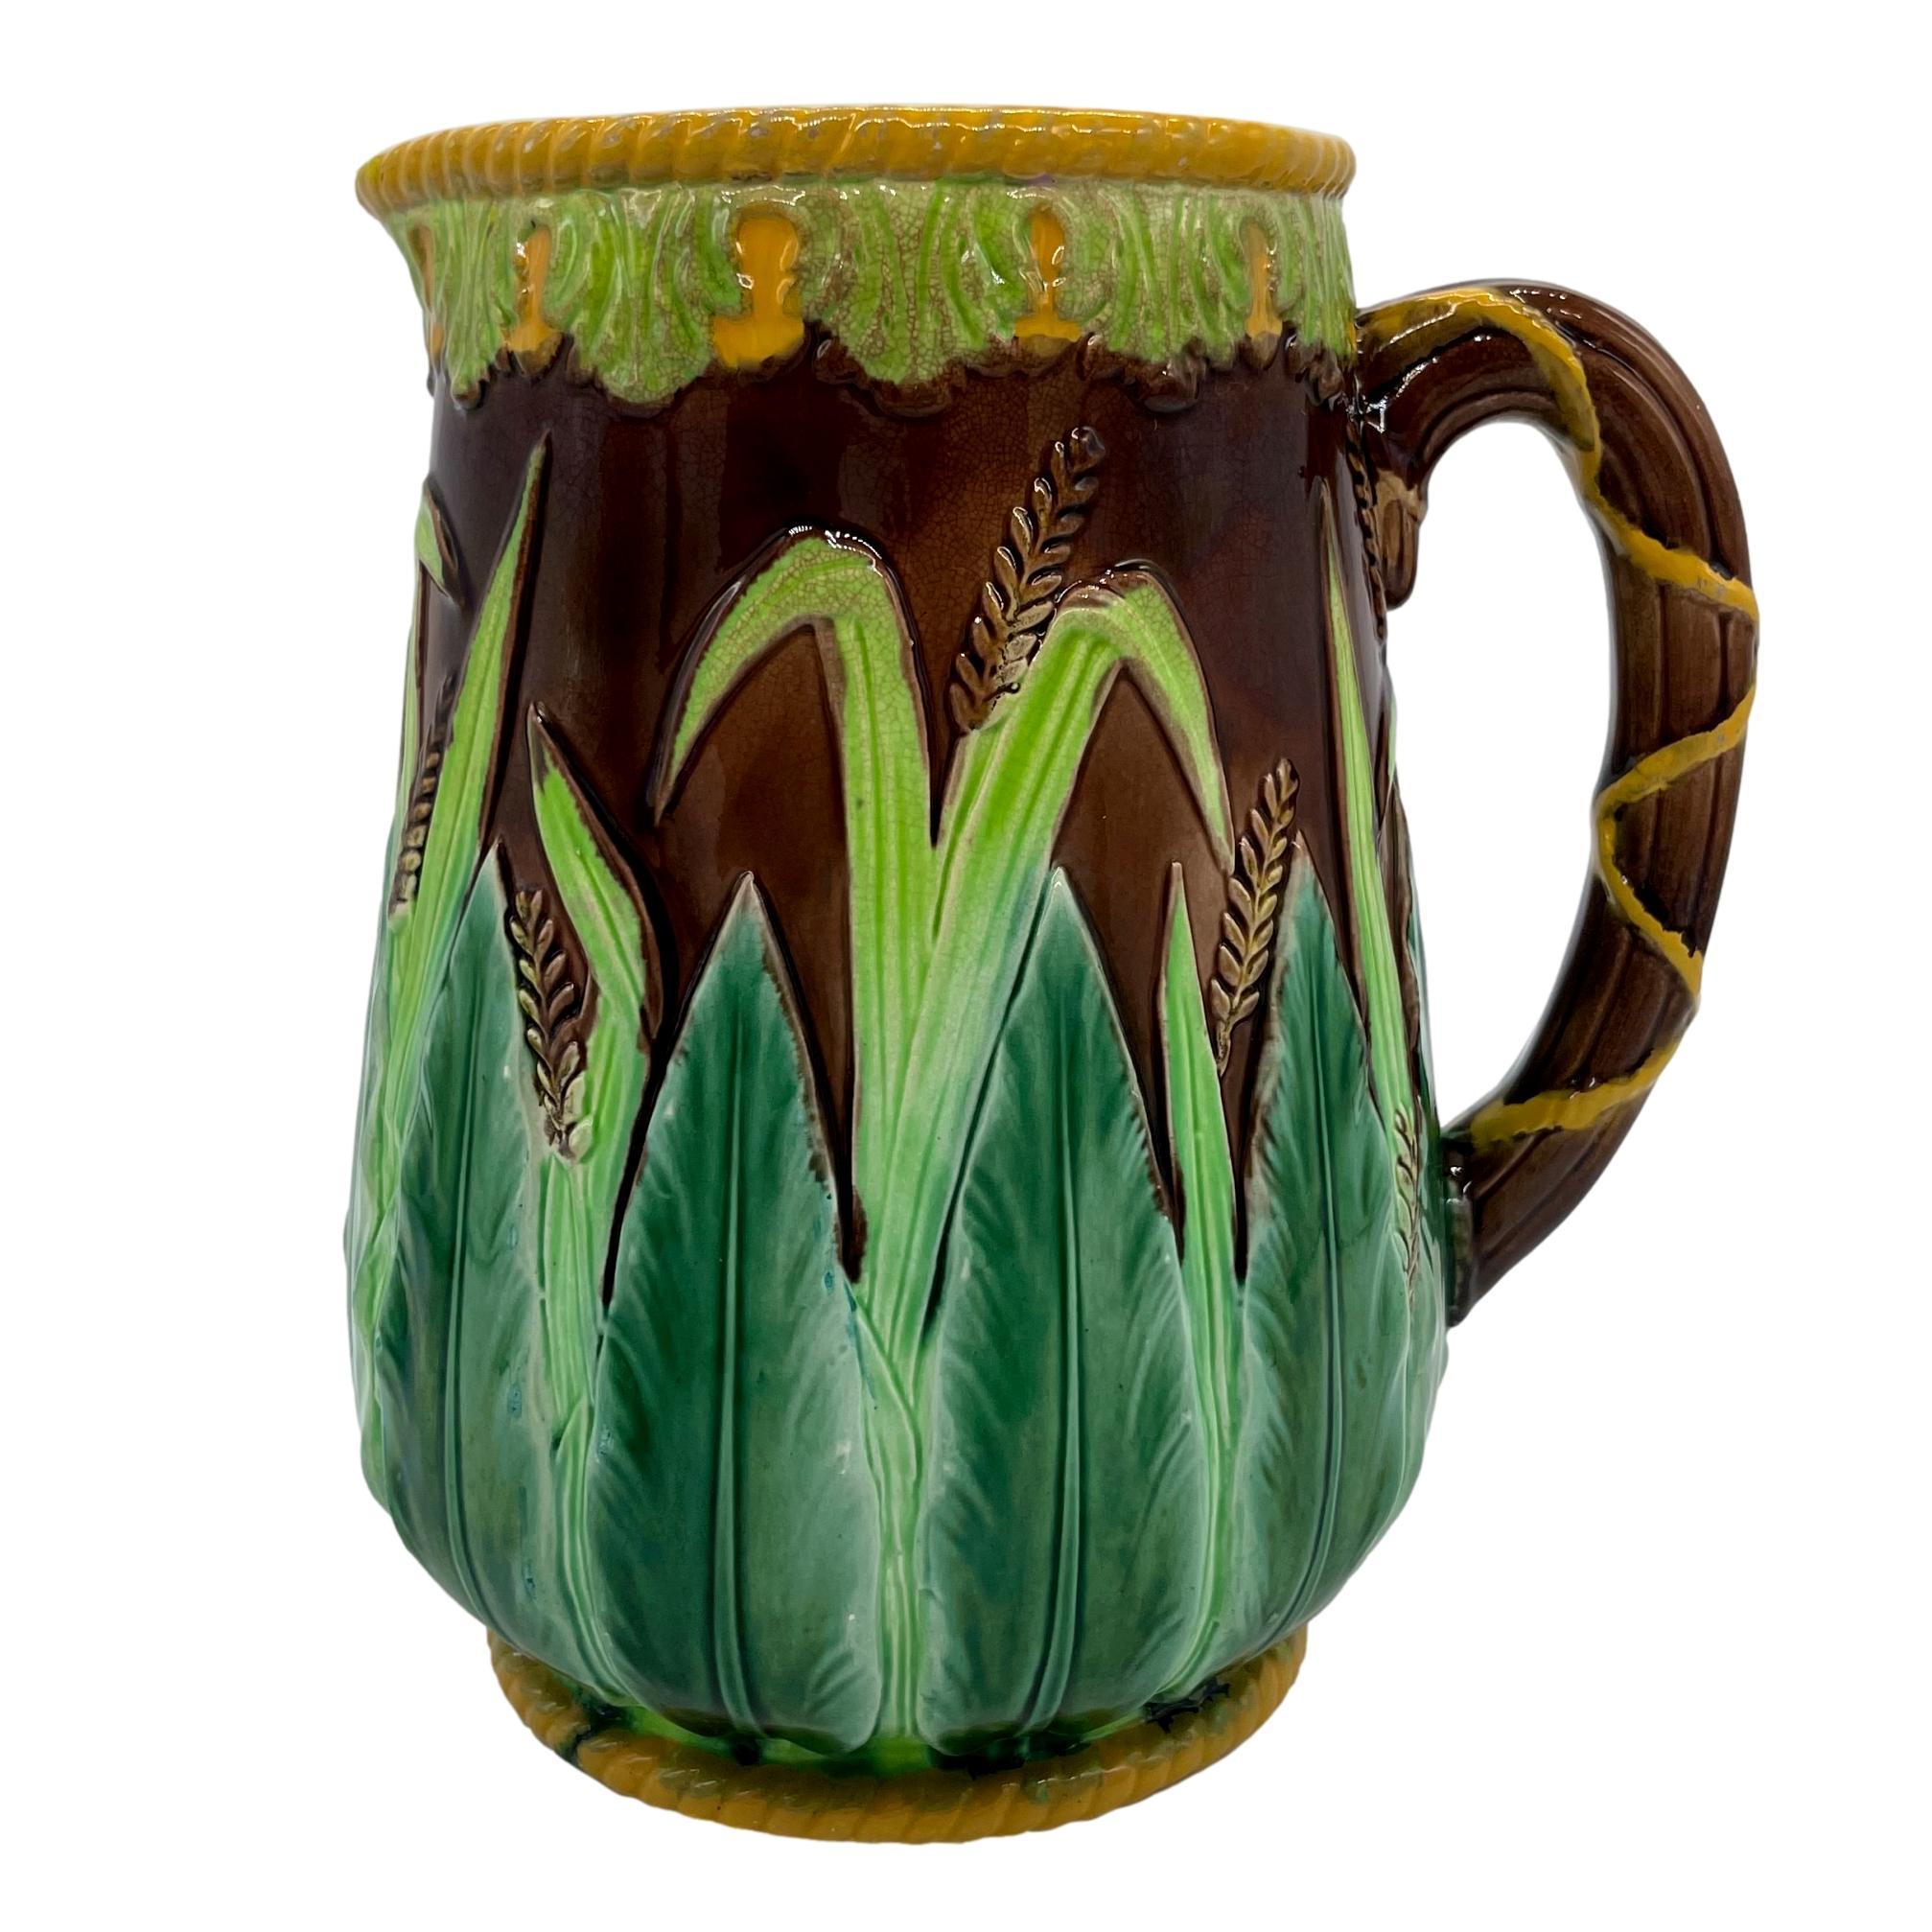 George Jones Majolica Table Pitcher, of baluster form with relief molded stiff acanthus leaves, grasses, and wheat on a brown ground, the top banded with stylized leaves glazed in chartreuse, with yellow glazed roping to the top rim and foot rim,